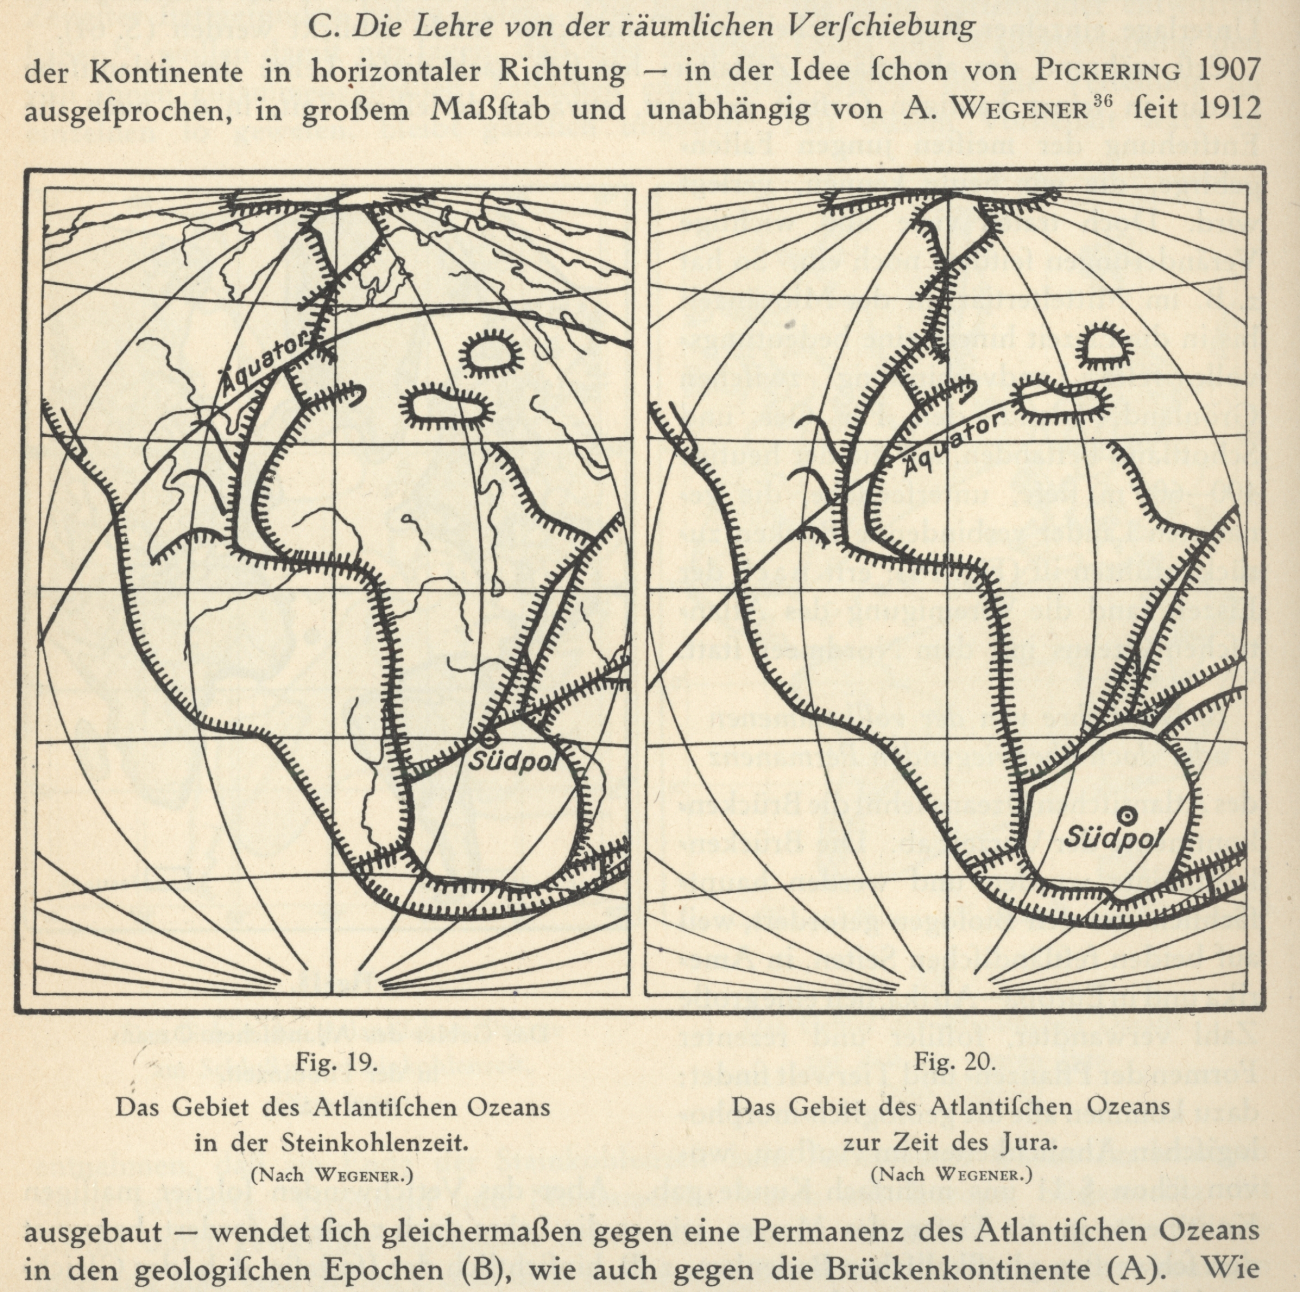 The breakup and separation of continents as envisioned by Alfred Wegener inGerhard Schott